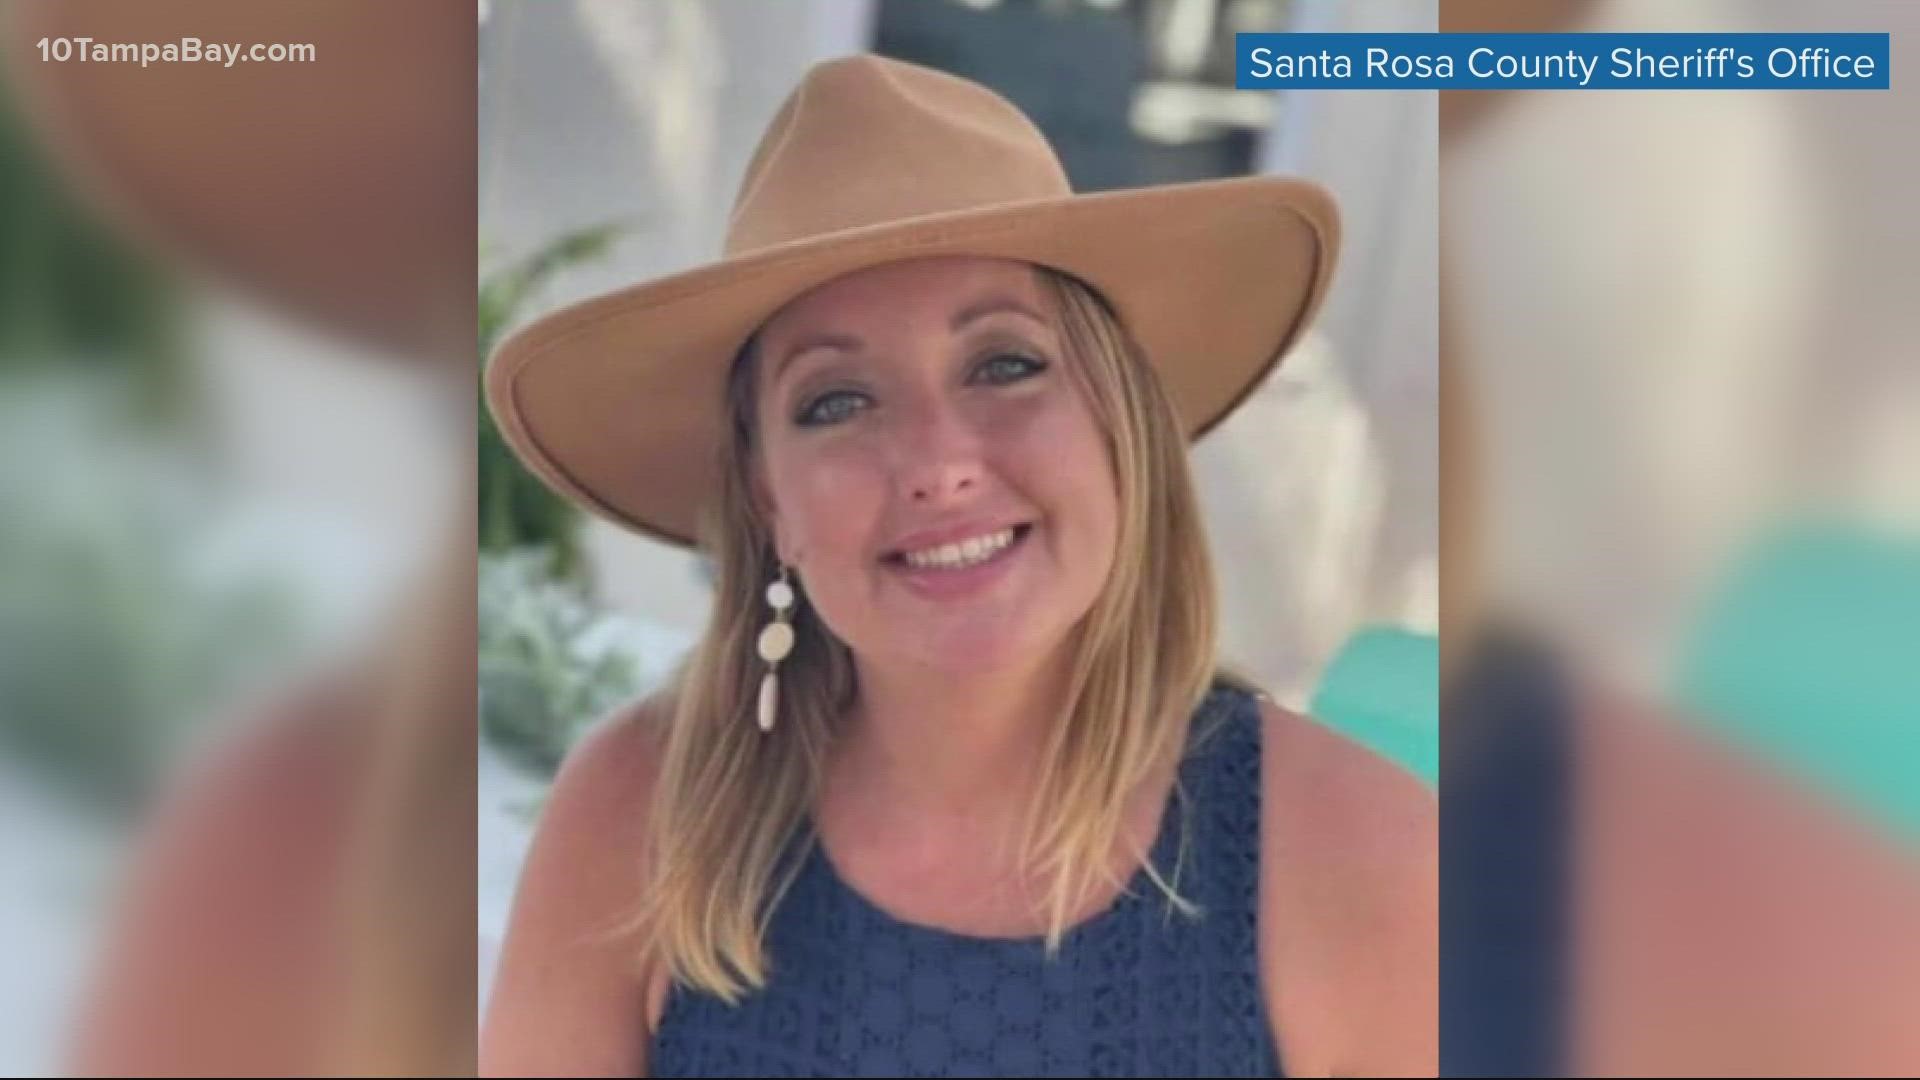 She was reported missing nearly one week ago when she never returned home from exchanging her daughter with the child's father.